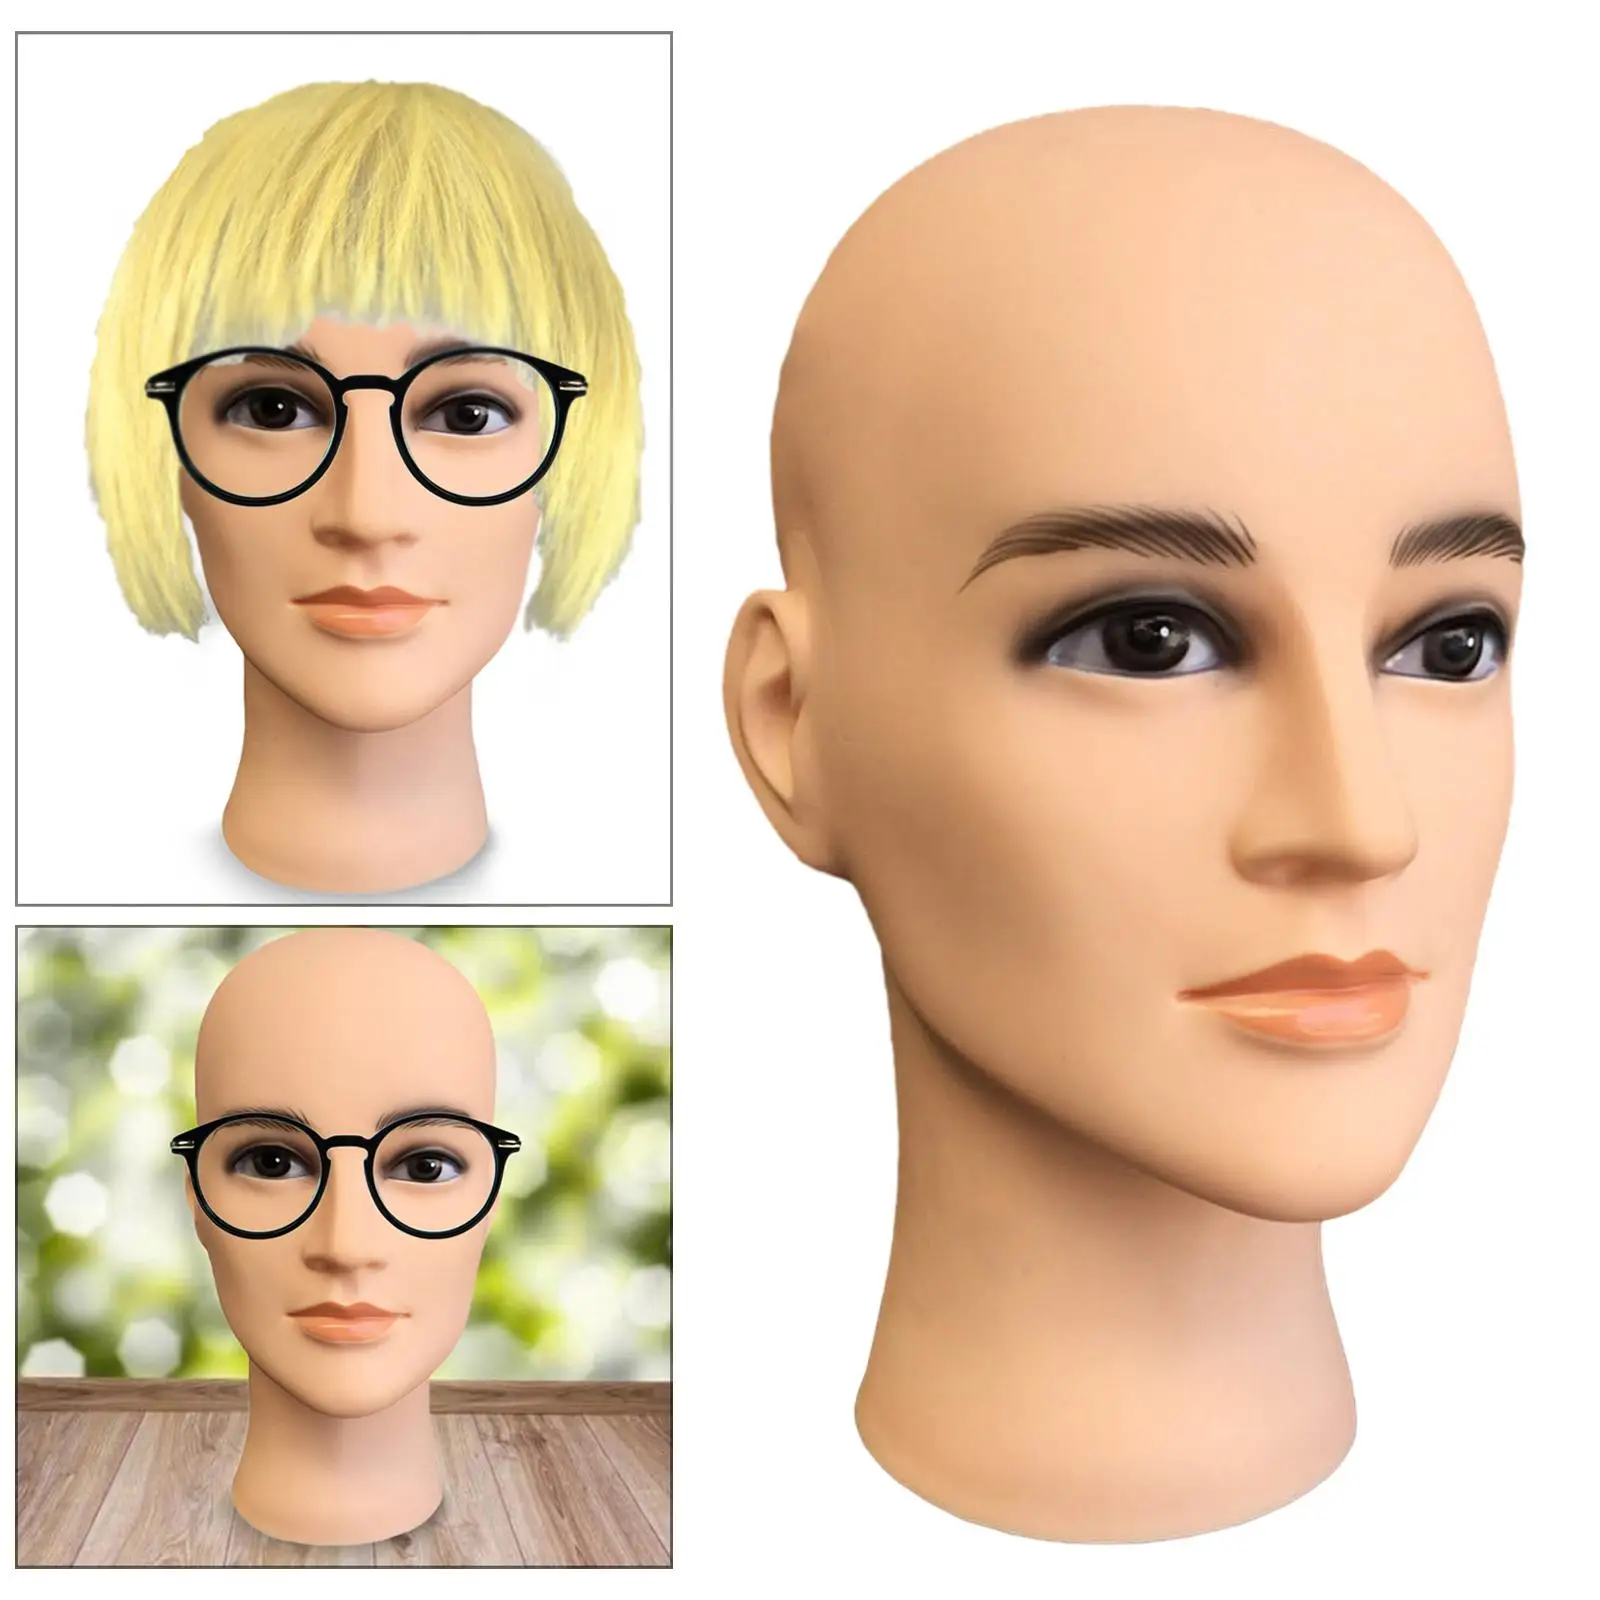 Professional Cosmetology Head Multipurpose PVC Male Mannequin Head for Necklace Glasses Caps Hats Wigs Displaying Making Styling